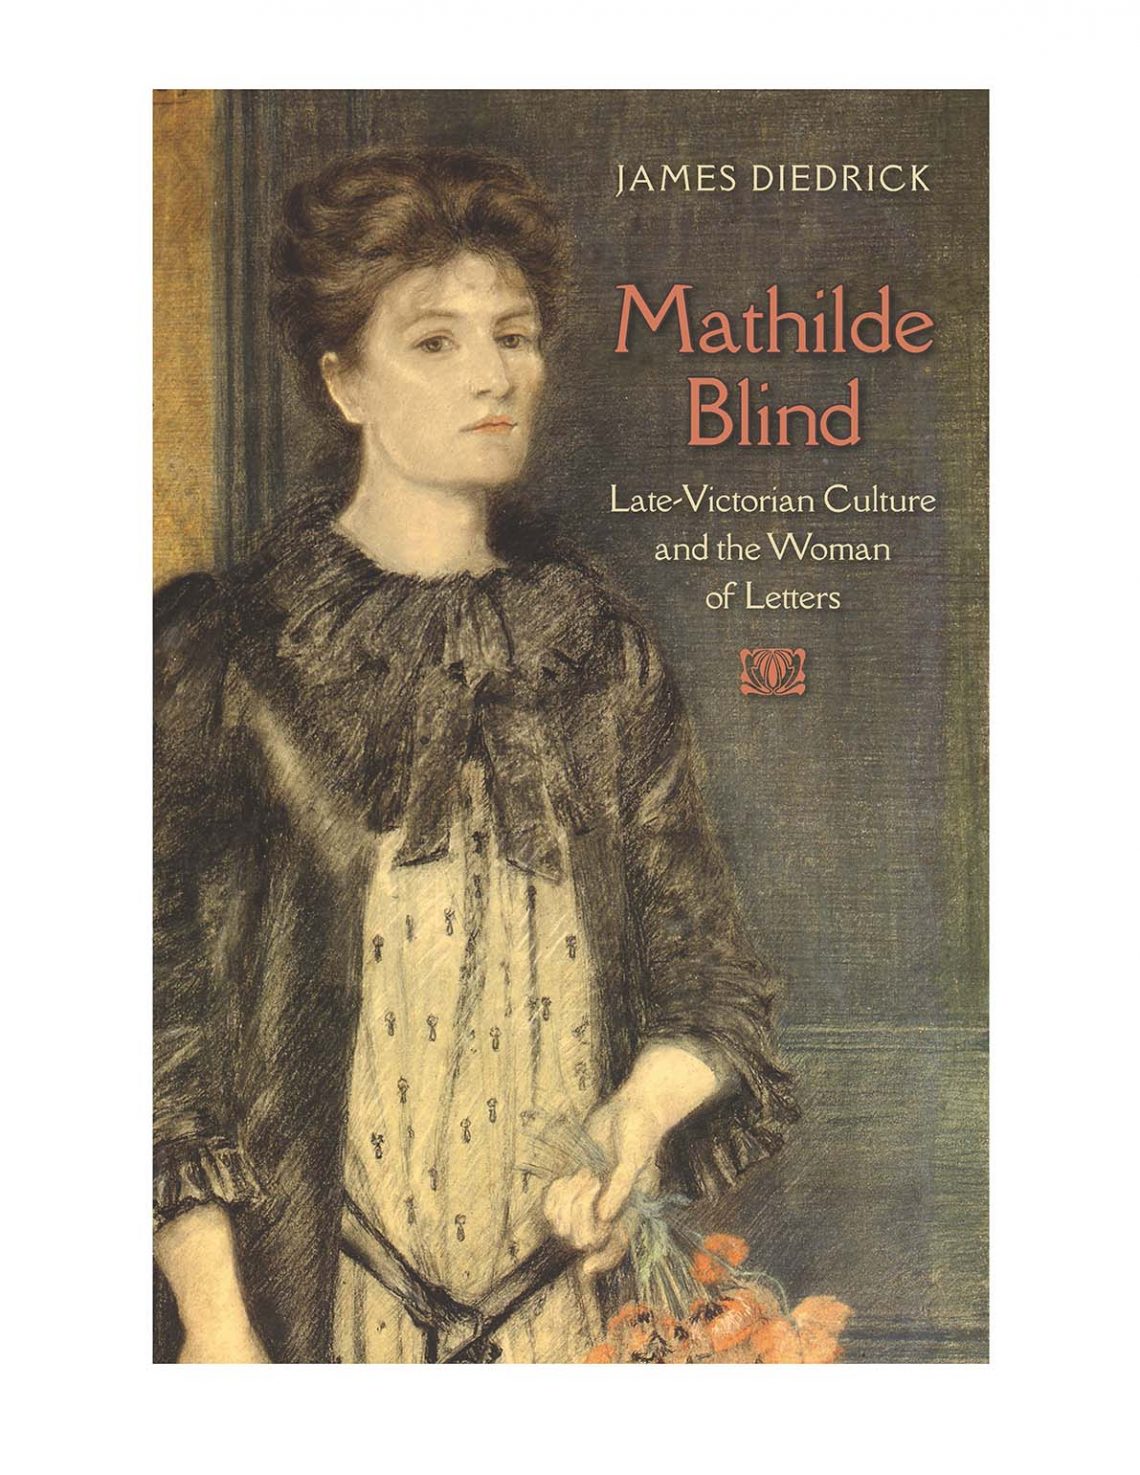 Mathilde Blind: Late-Victorian Culture and the Woman of Letters reviewed in 19th Century Gender Studies